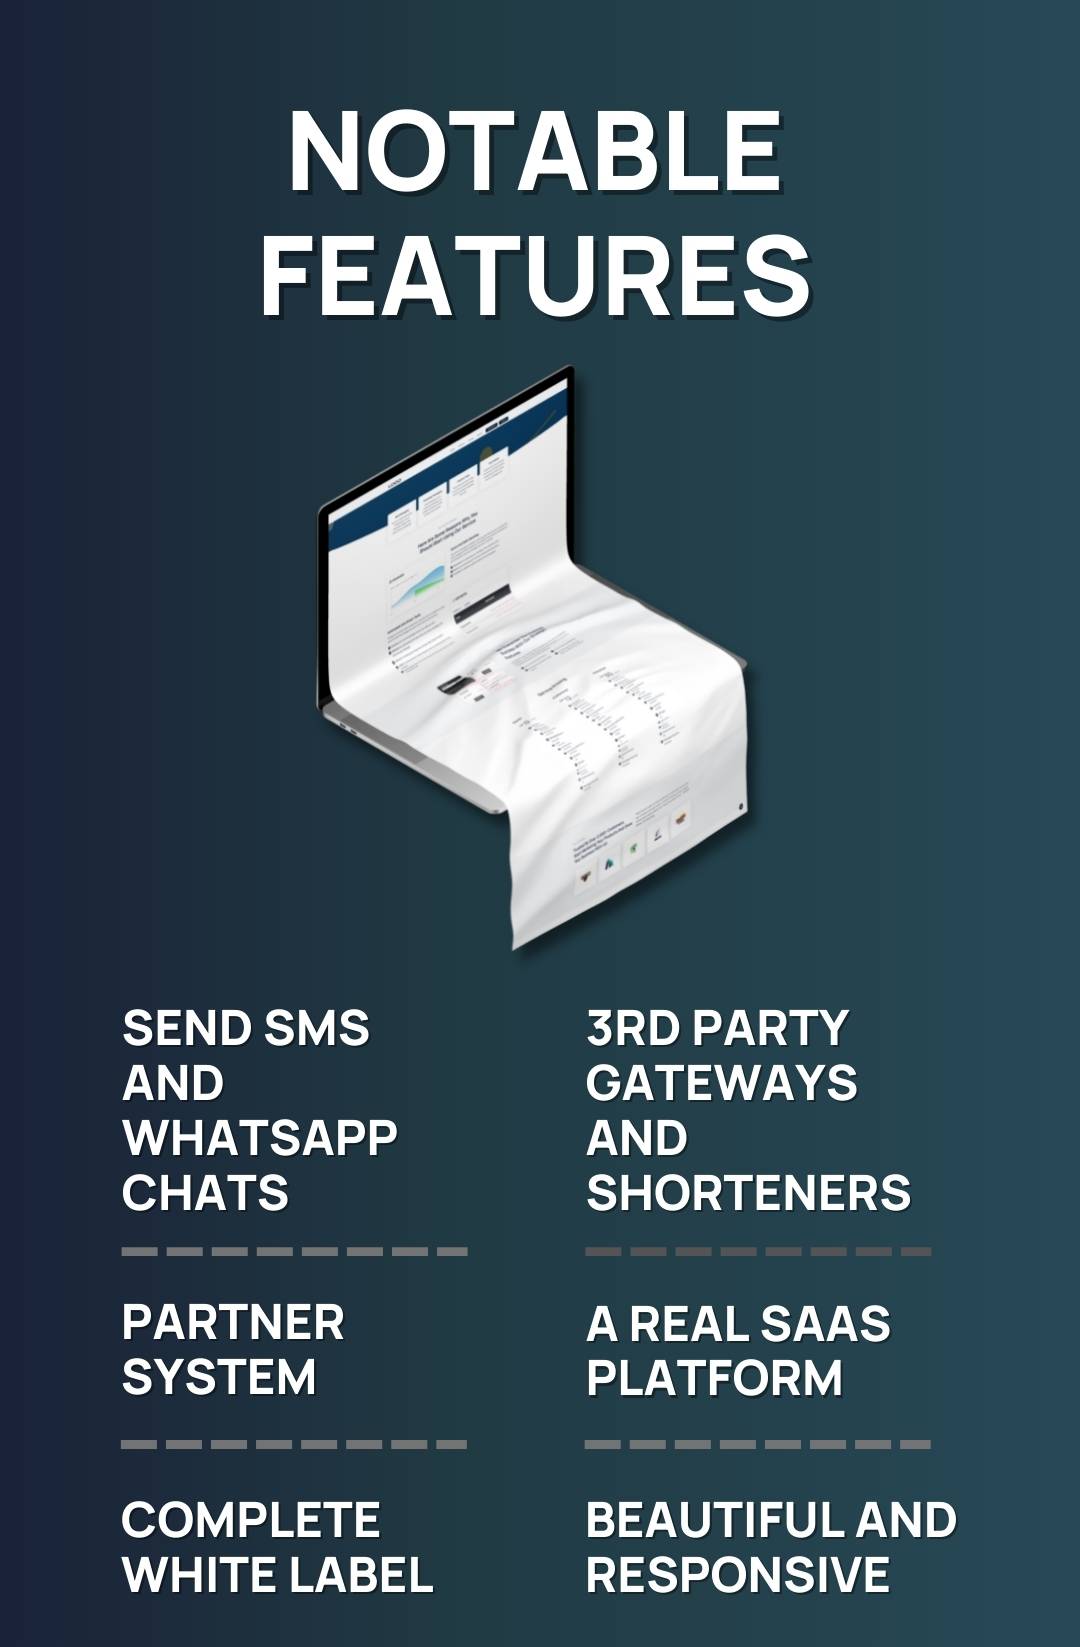 Zender - Ultimate Messaging Platform for SMS, WhatsApp & use Android Devices as SMS Gateways (SaaS) - 7